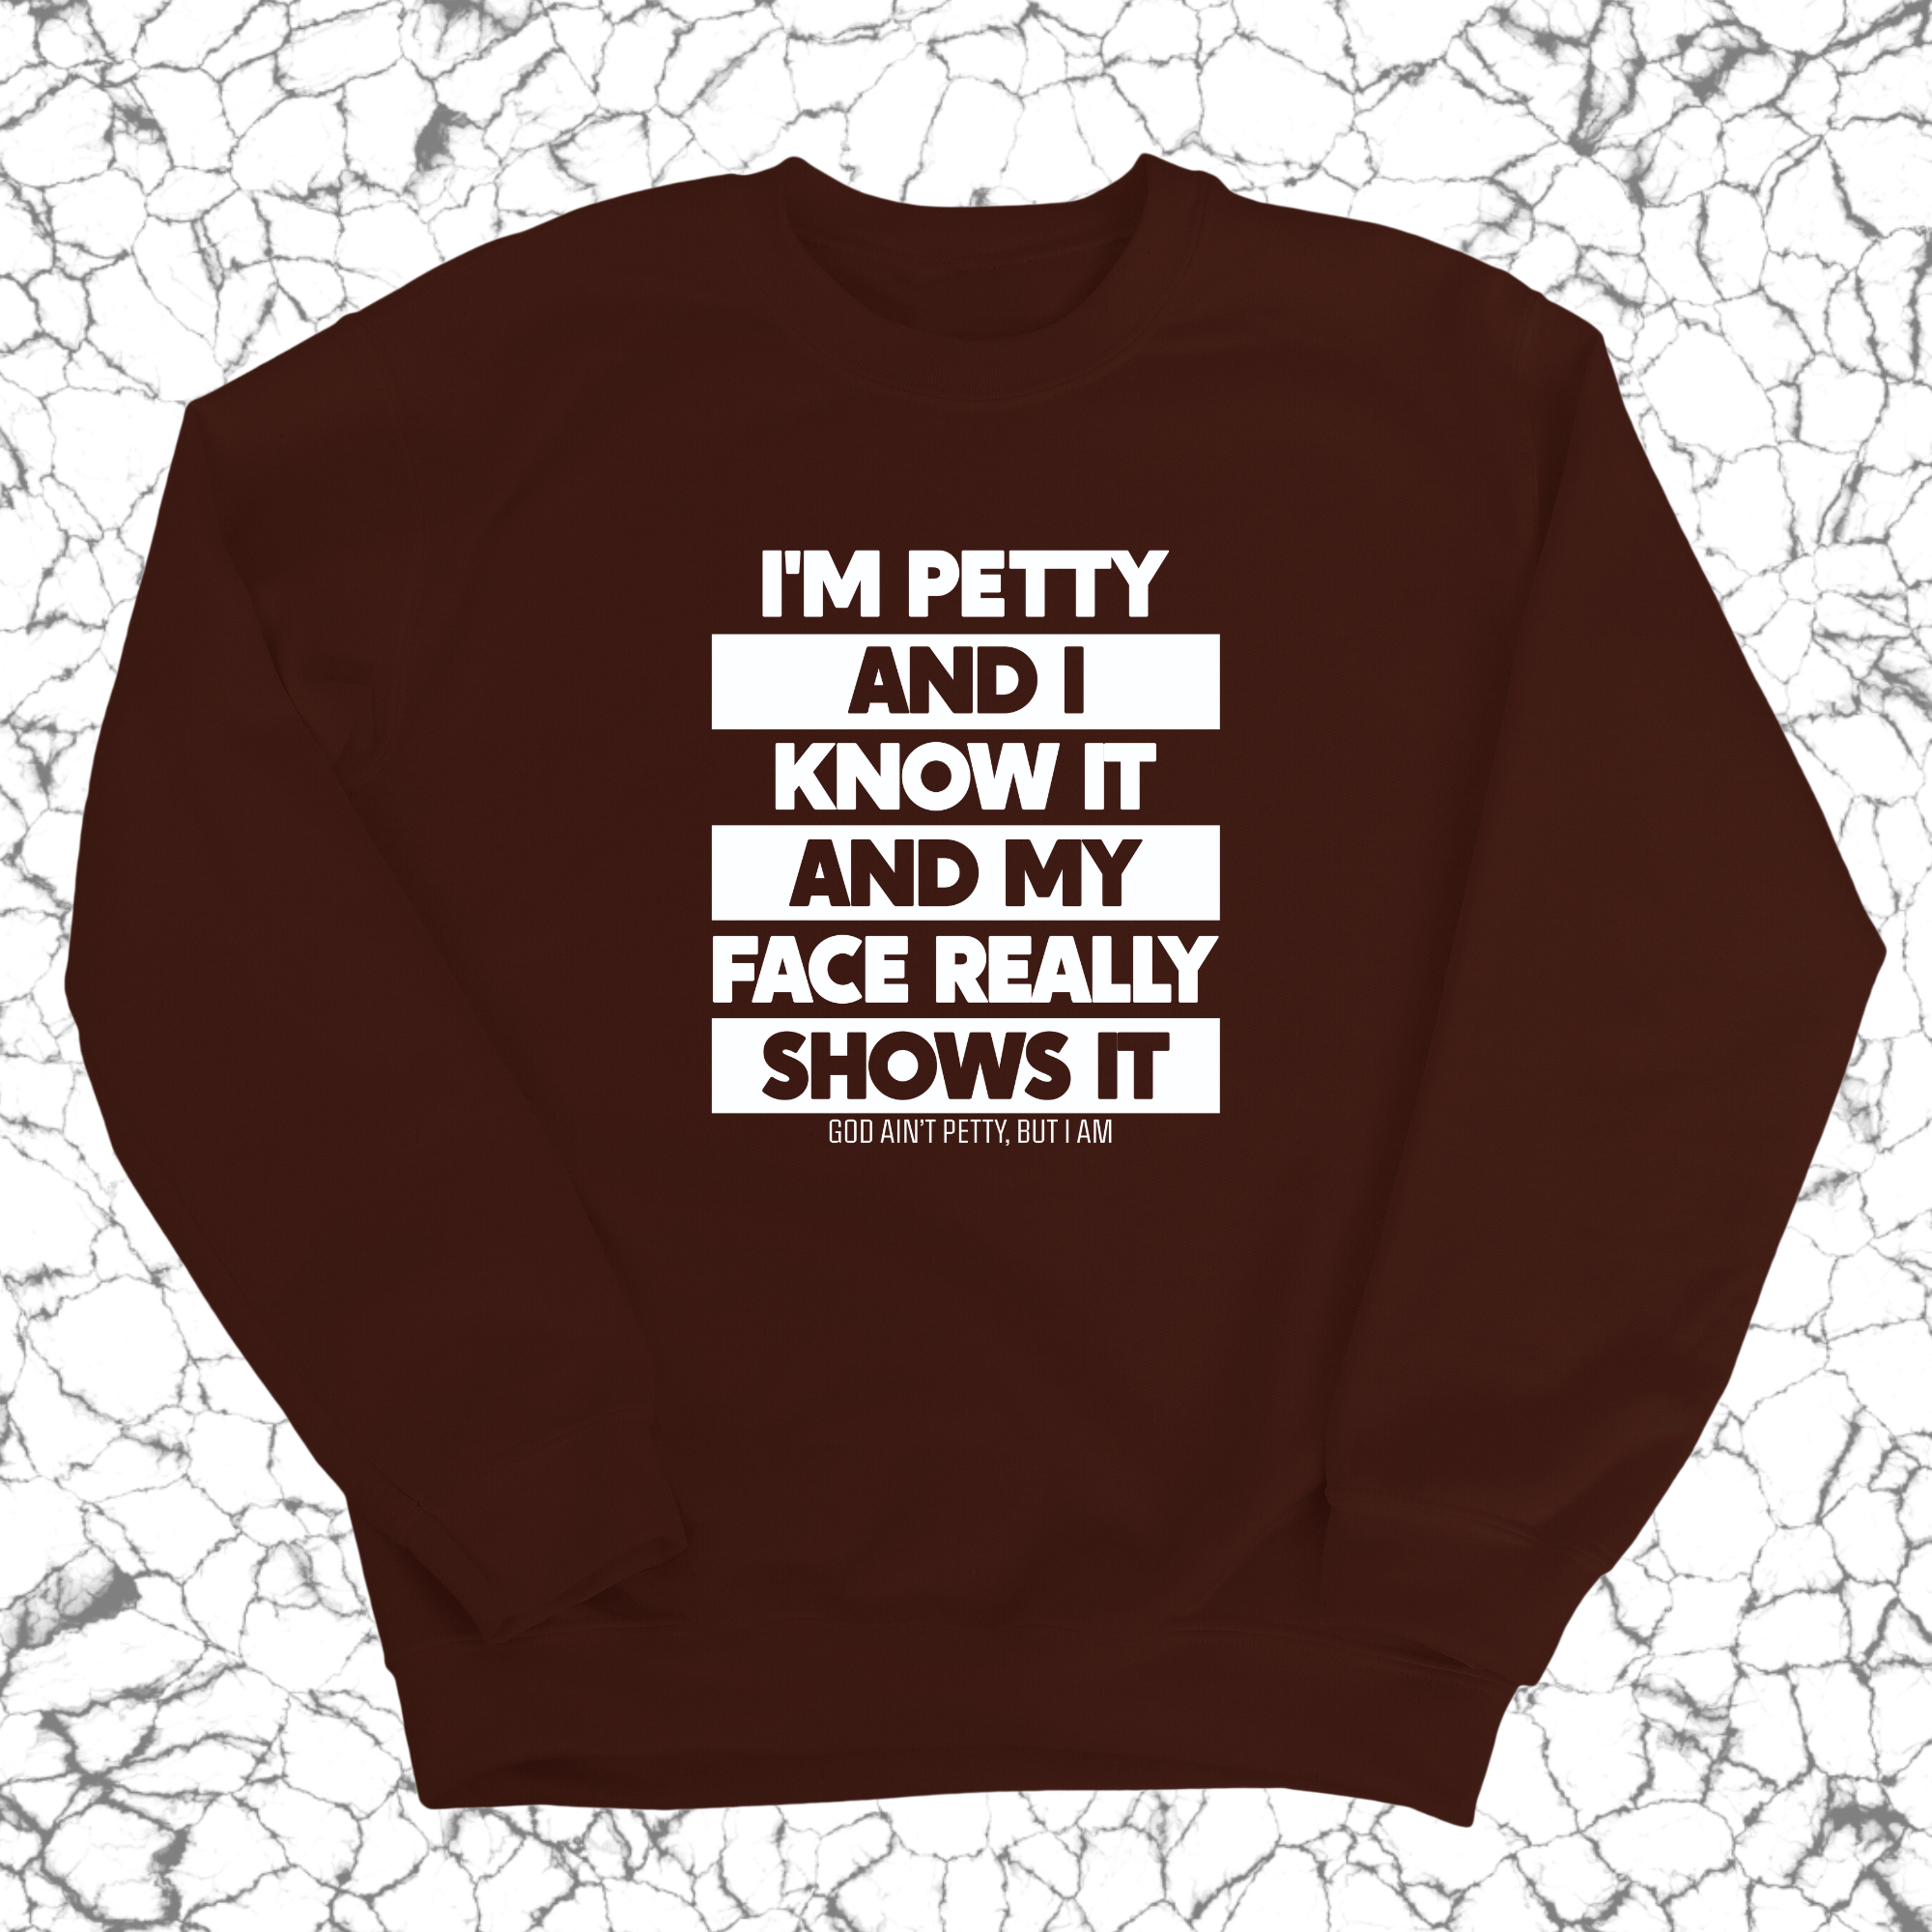 I'm petty and I know it and my petty face really shows it Unisex Sweatshirt-Sweatshirt-The Original God Ain't Petty But I Am